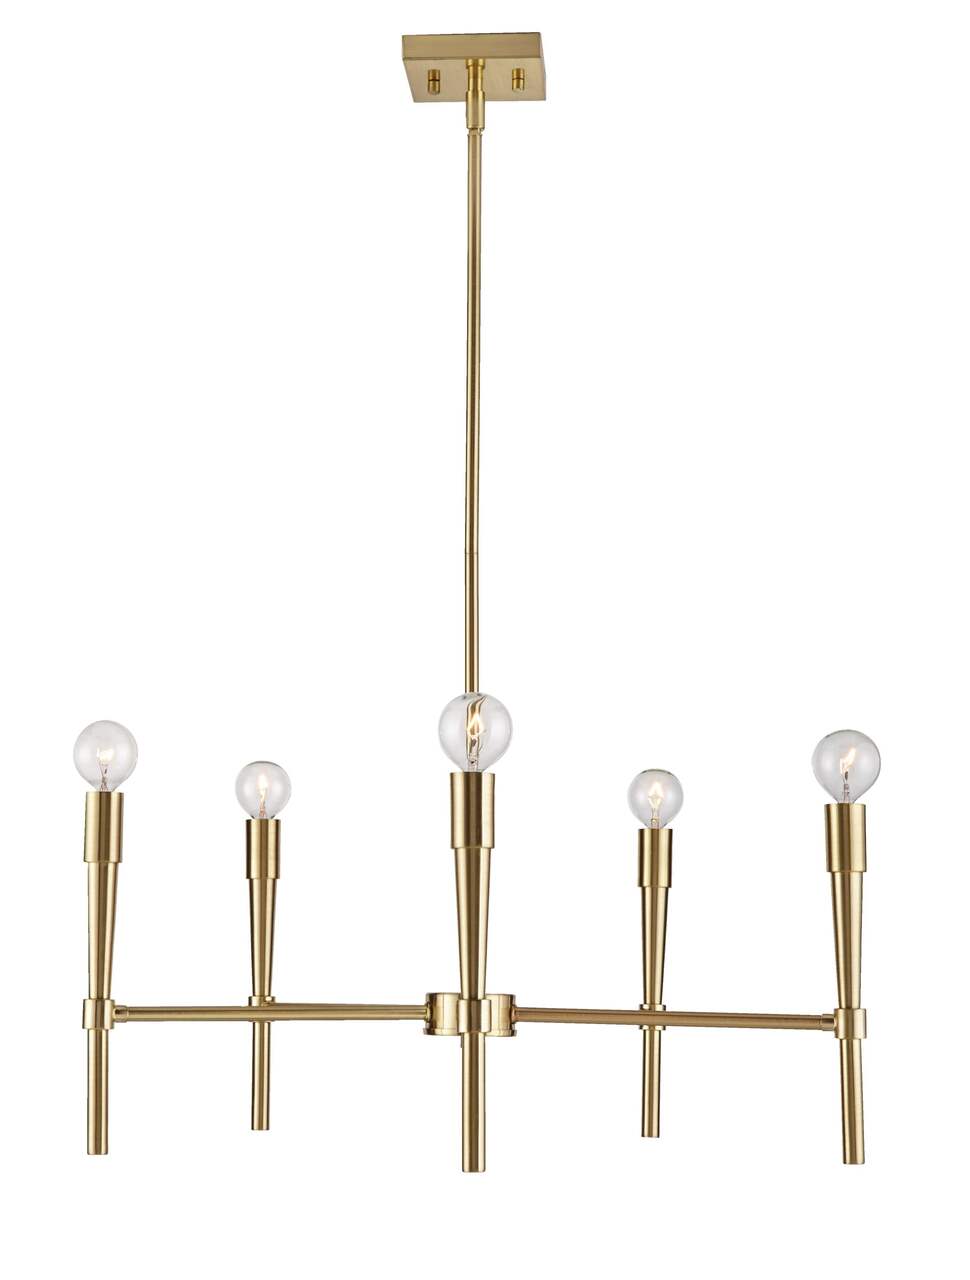 https://media-www.canadiantire.ca/product/living/home-decor/lighting/0522685/canvas-harlowe-chandelier-91b72d3d-9f42-43d4-b969-754ea4626c10-jpgrendition.jpg?imdensity=1&imwidth=1244&impolicy=mZoom